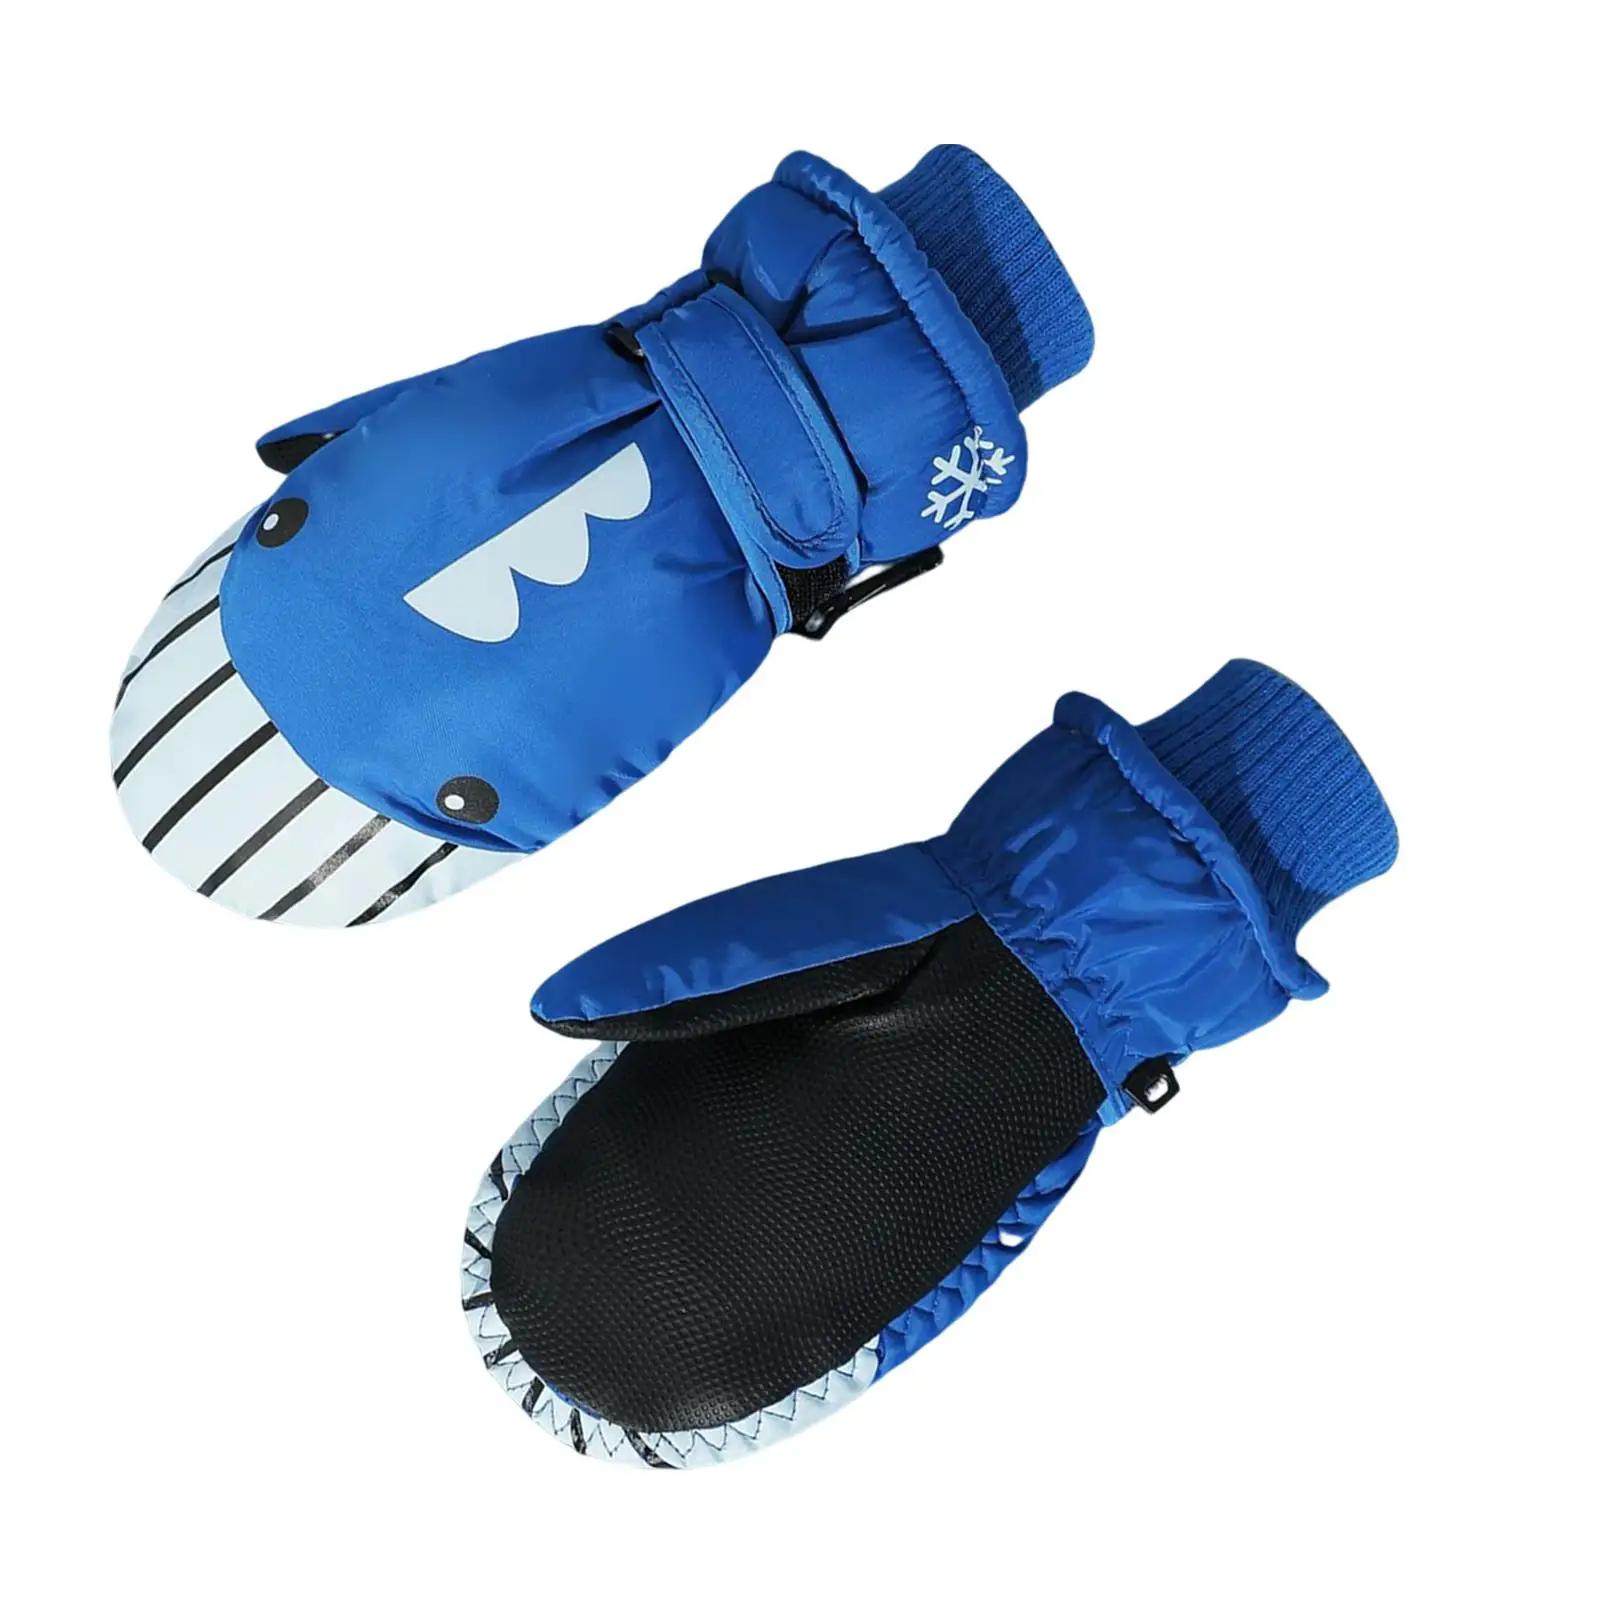 Mittens Adjustable Practical Comfortable Thickened Connecting Lock Insulated Snow Ski Gloves for Boys Girls Children Outdoor